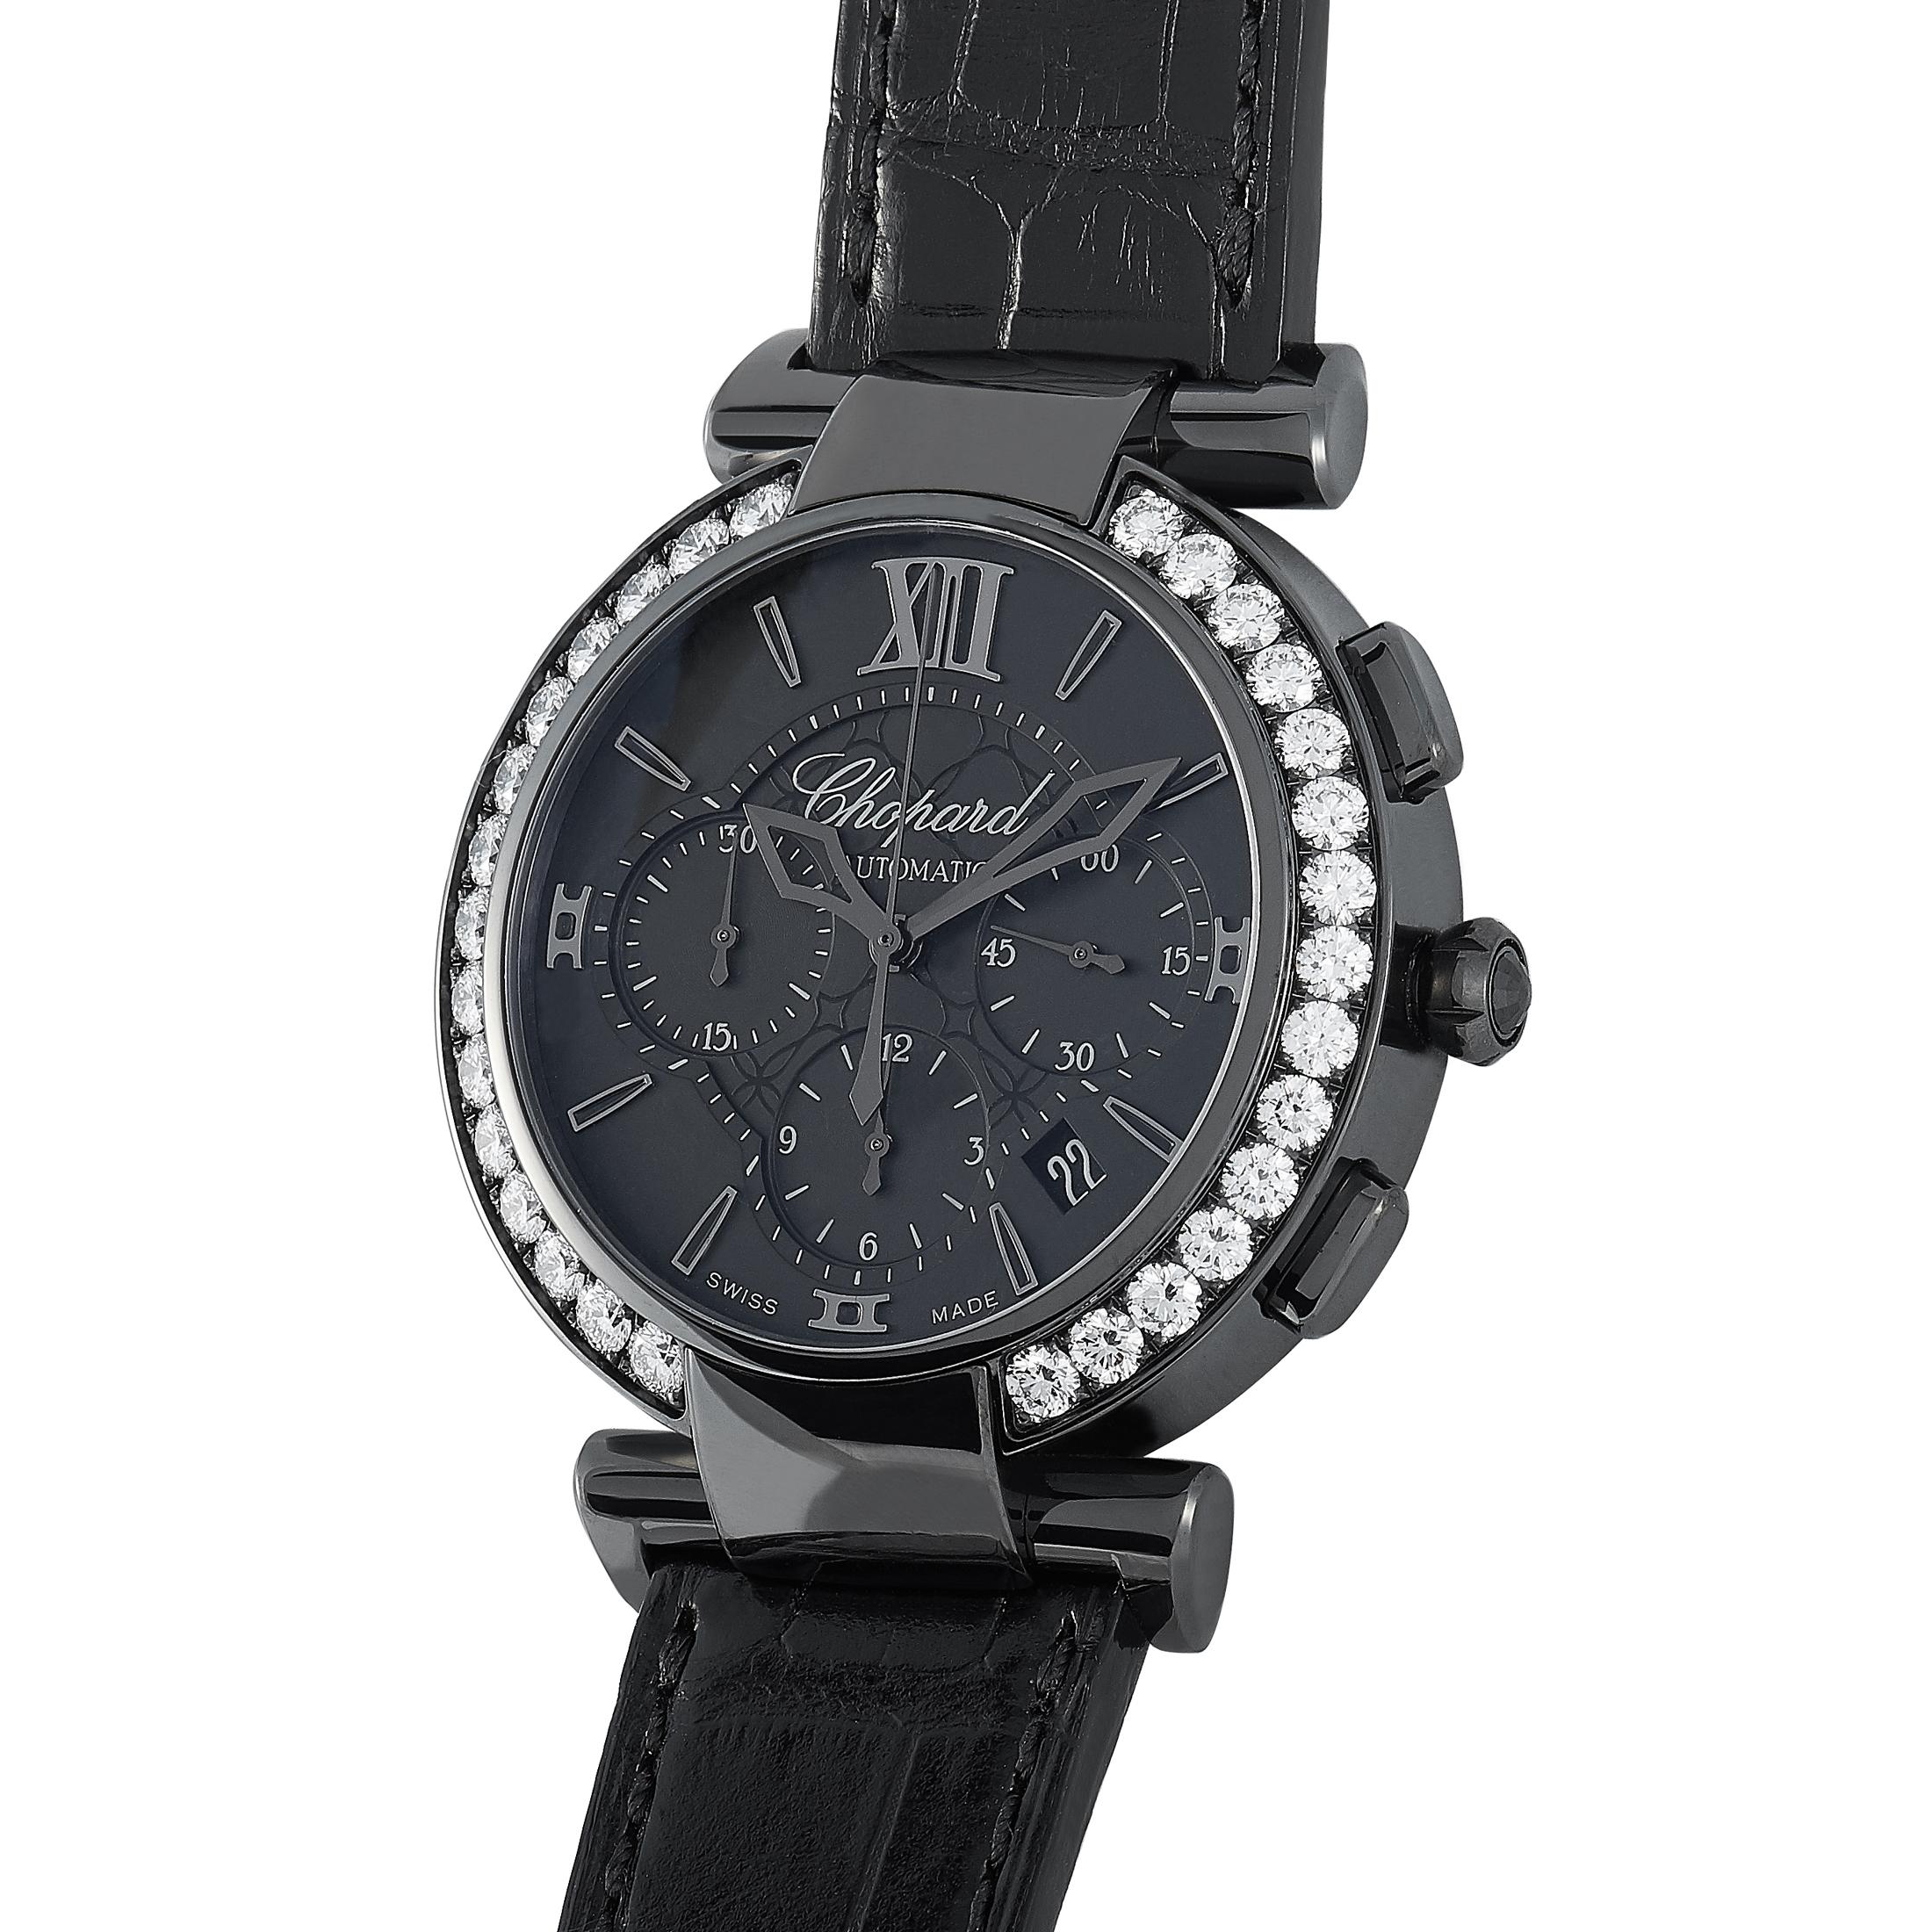 The Chopard Imperiale timepiece, reference number 388549-3008, is a member of the esteemed “Imperiale” collection.

The watch is presented with a black DLC-coated stainless steel case that boasts a diamond-set bezel. The case measures 40 mm in